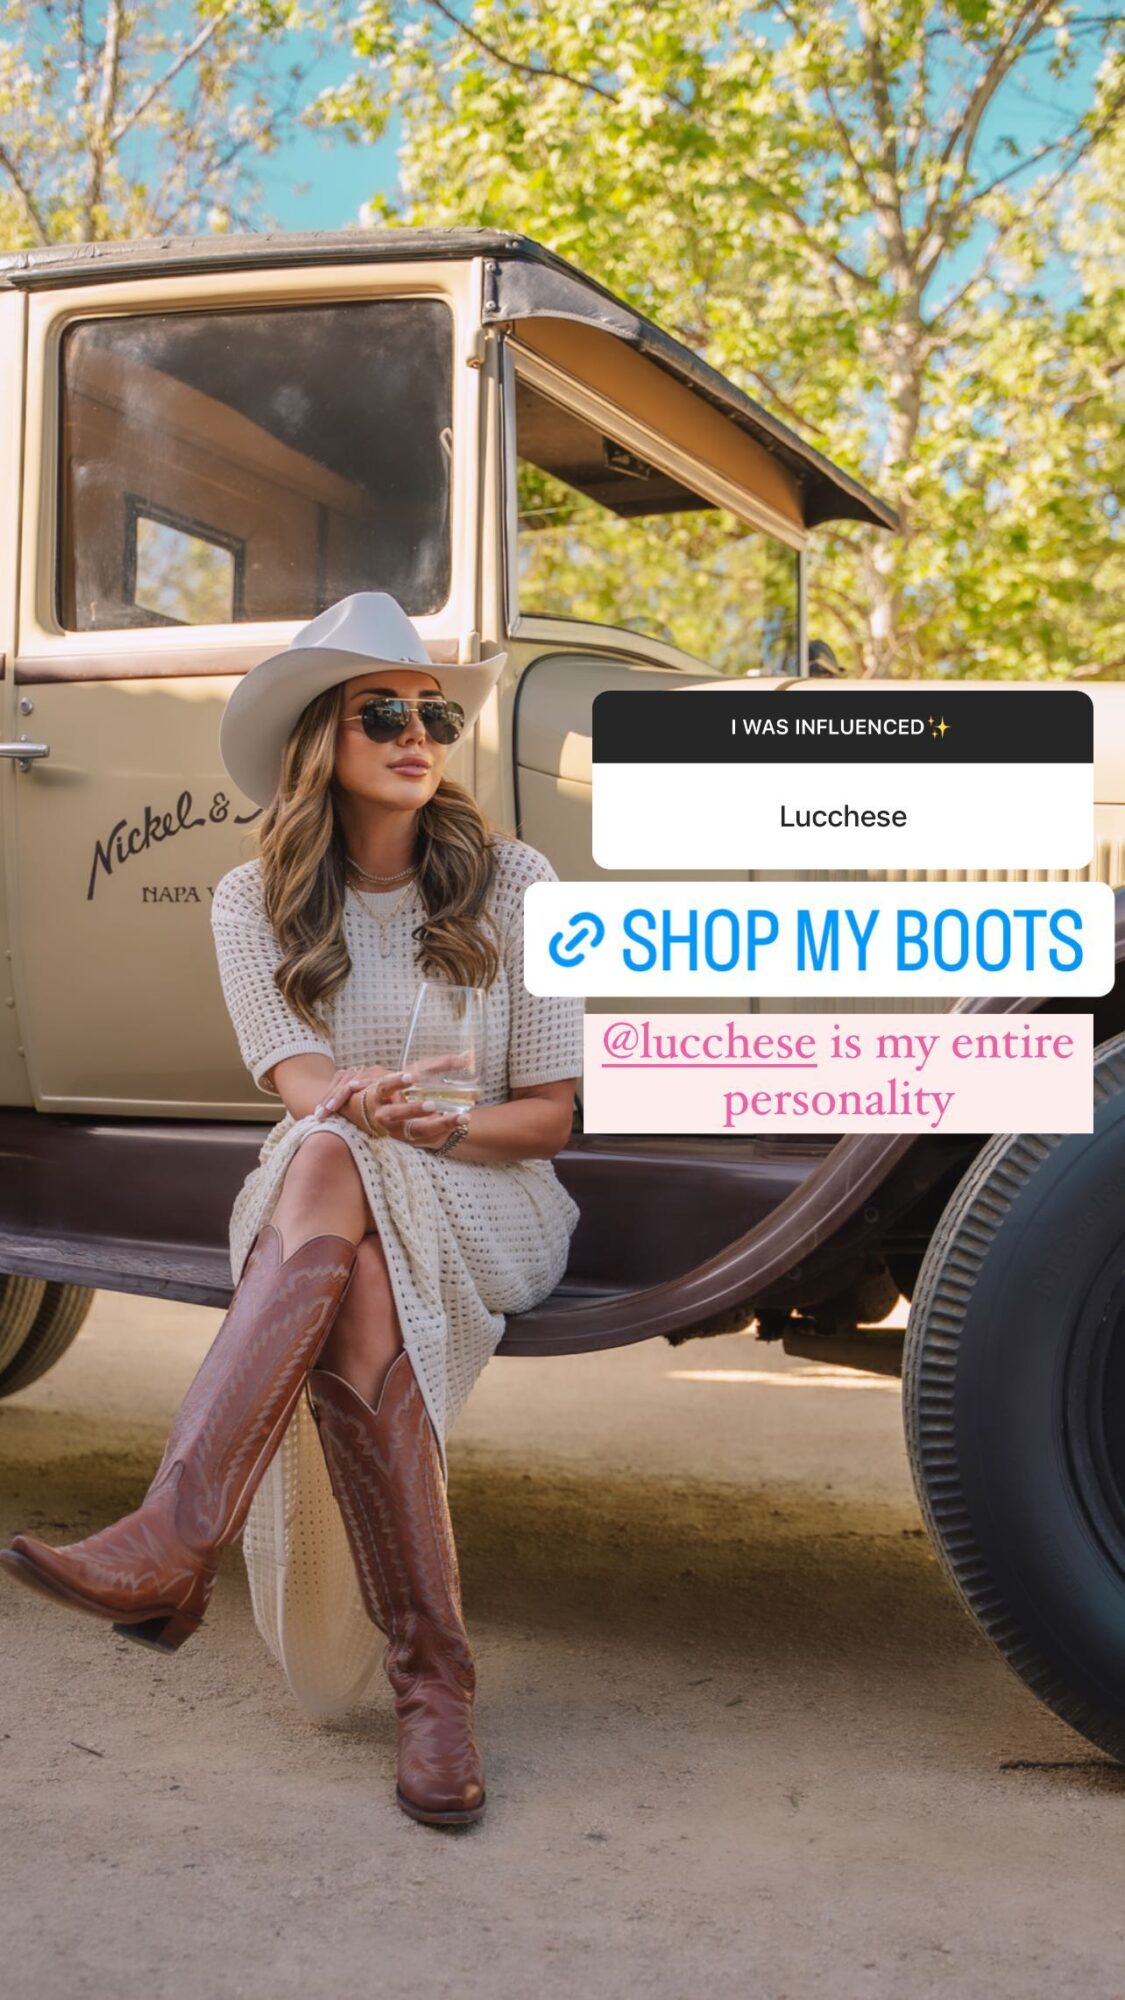 Influencer @therealmorganhale drives traffic to her Lucchese native storefront from social. Powered by LoudCrowd's creator commerce solutions.